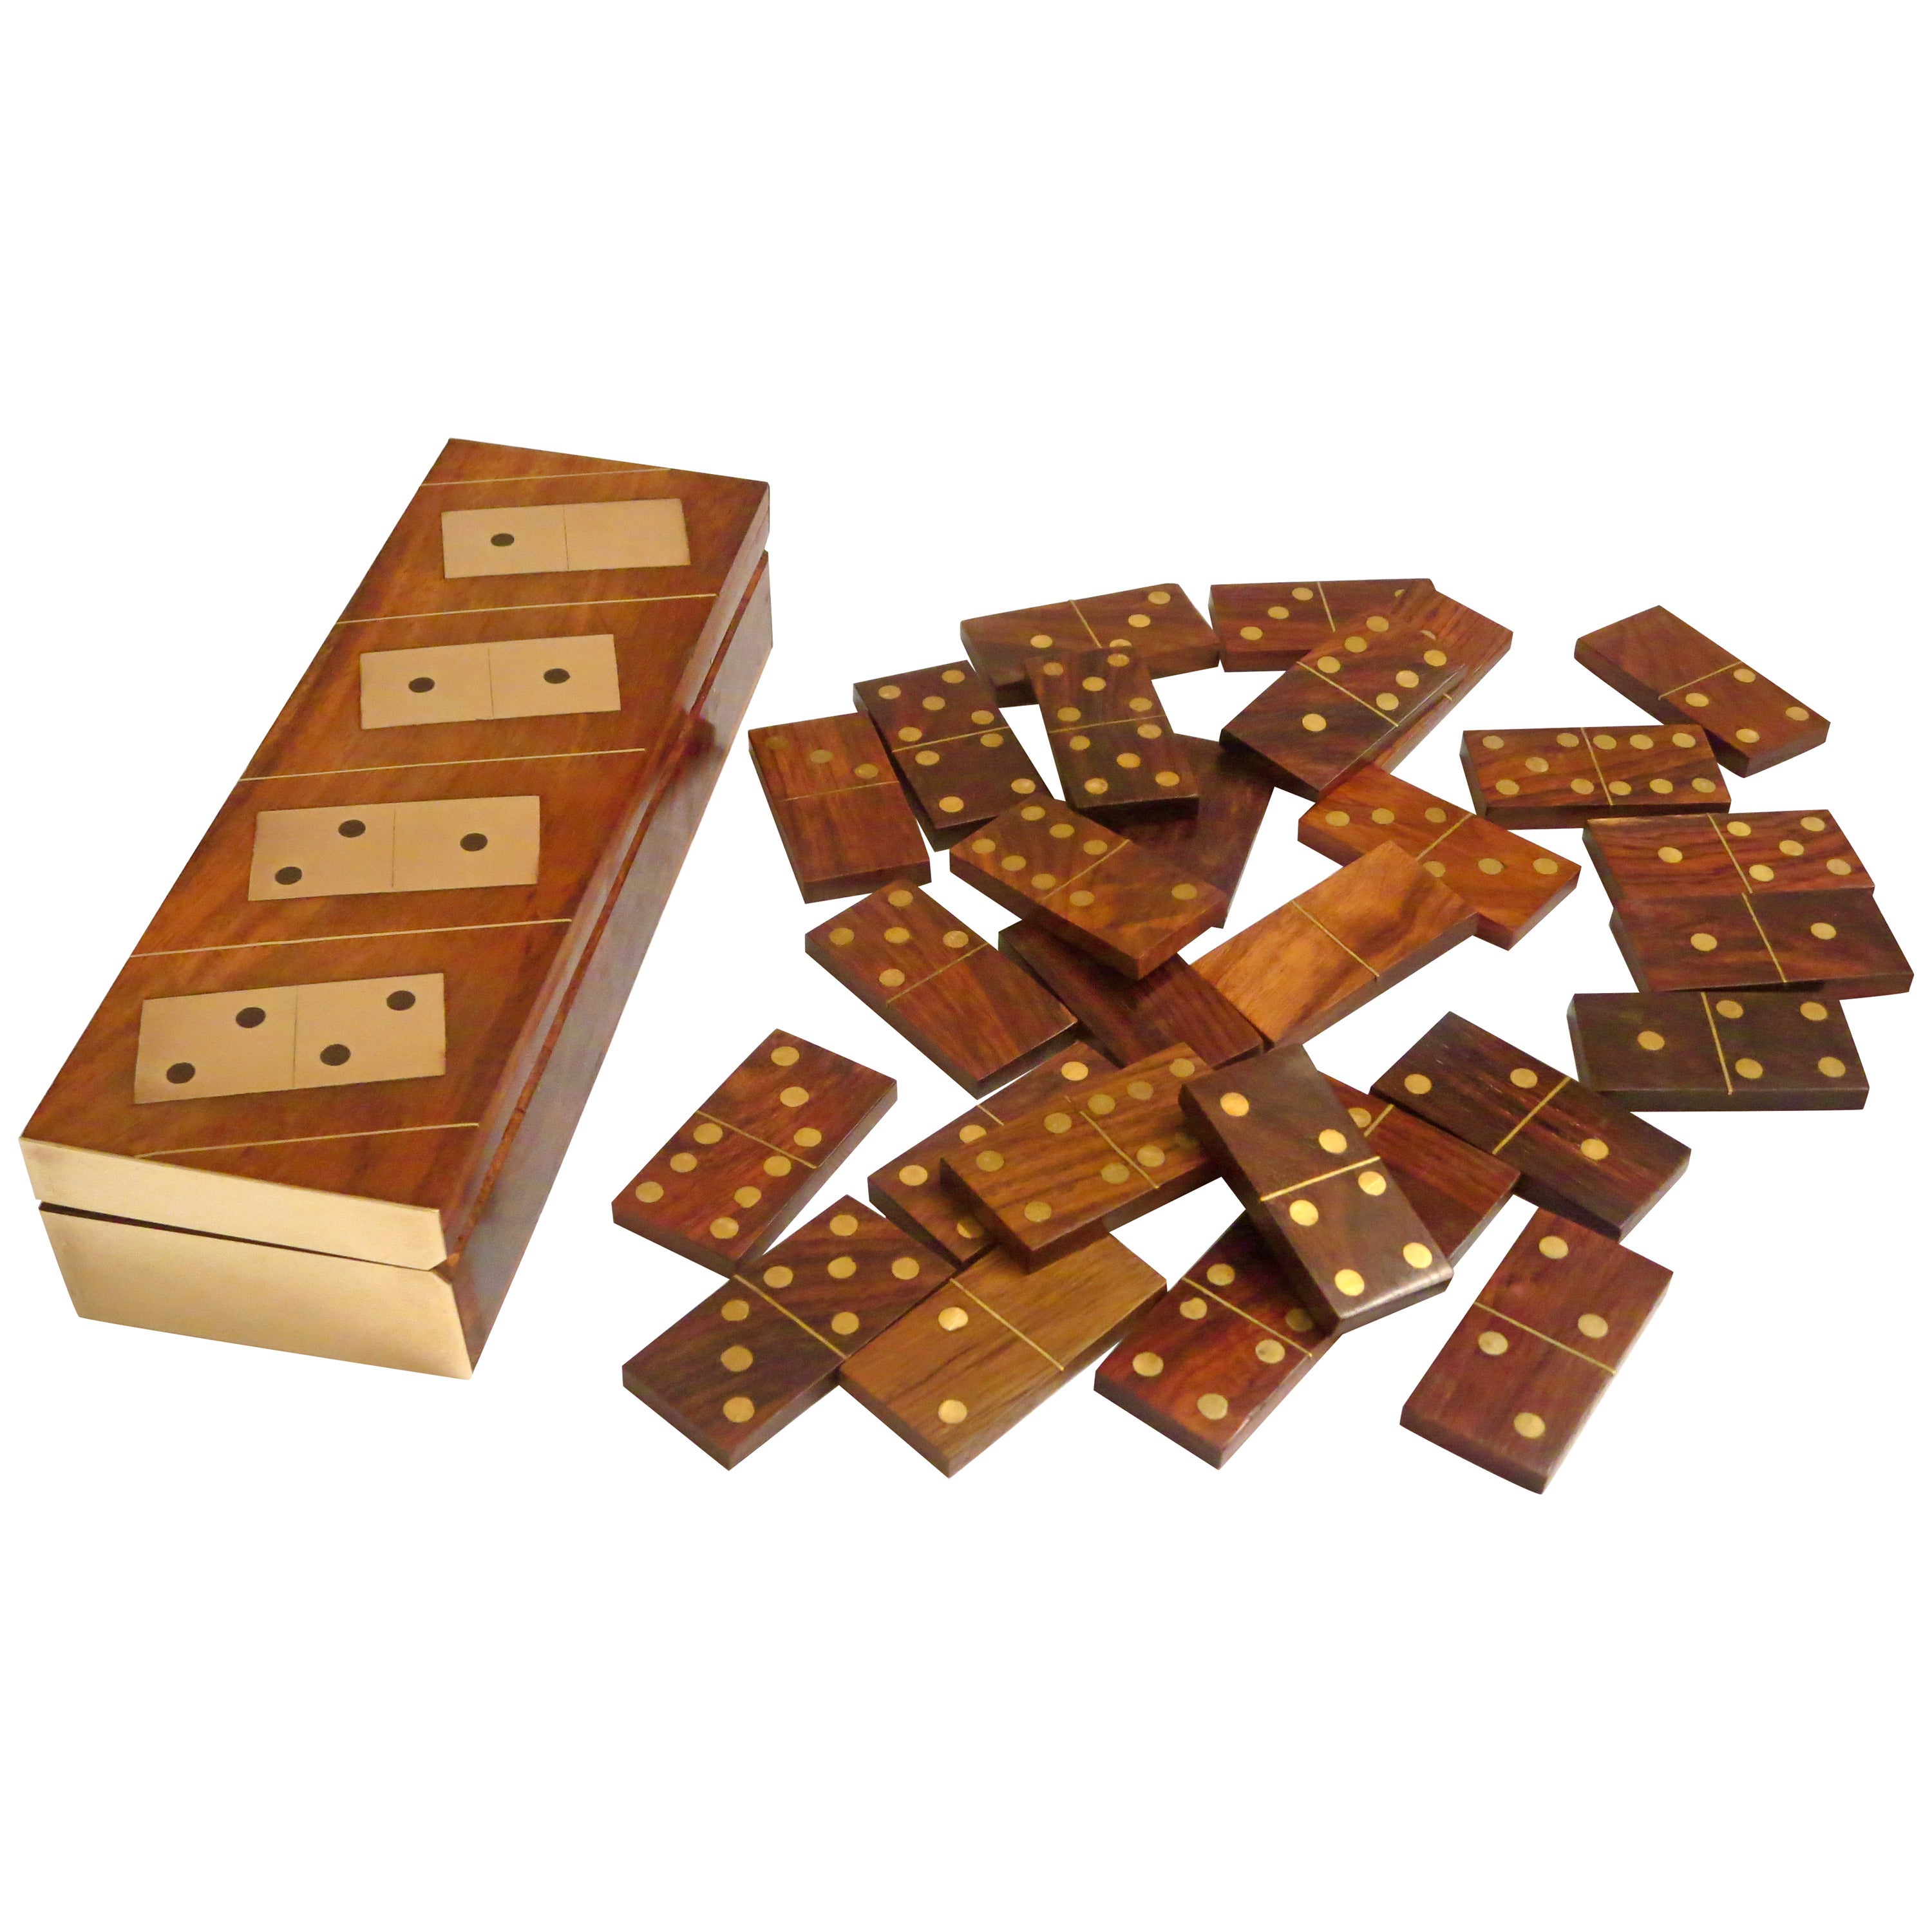 1970s Rosewood and Brass Inlaid Elegant Domino Set and Case